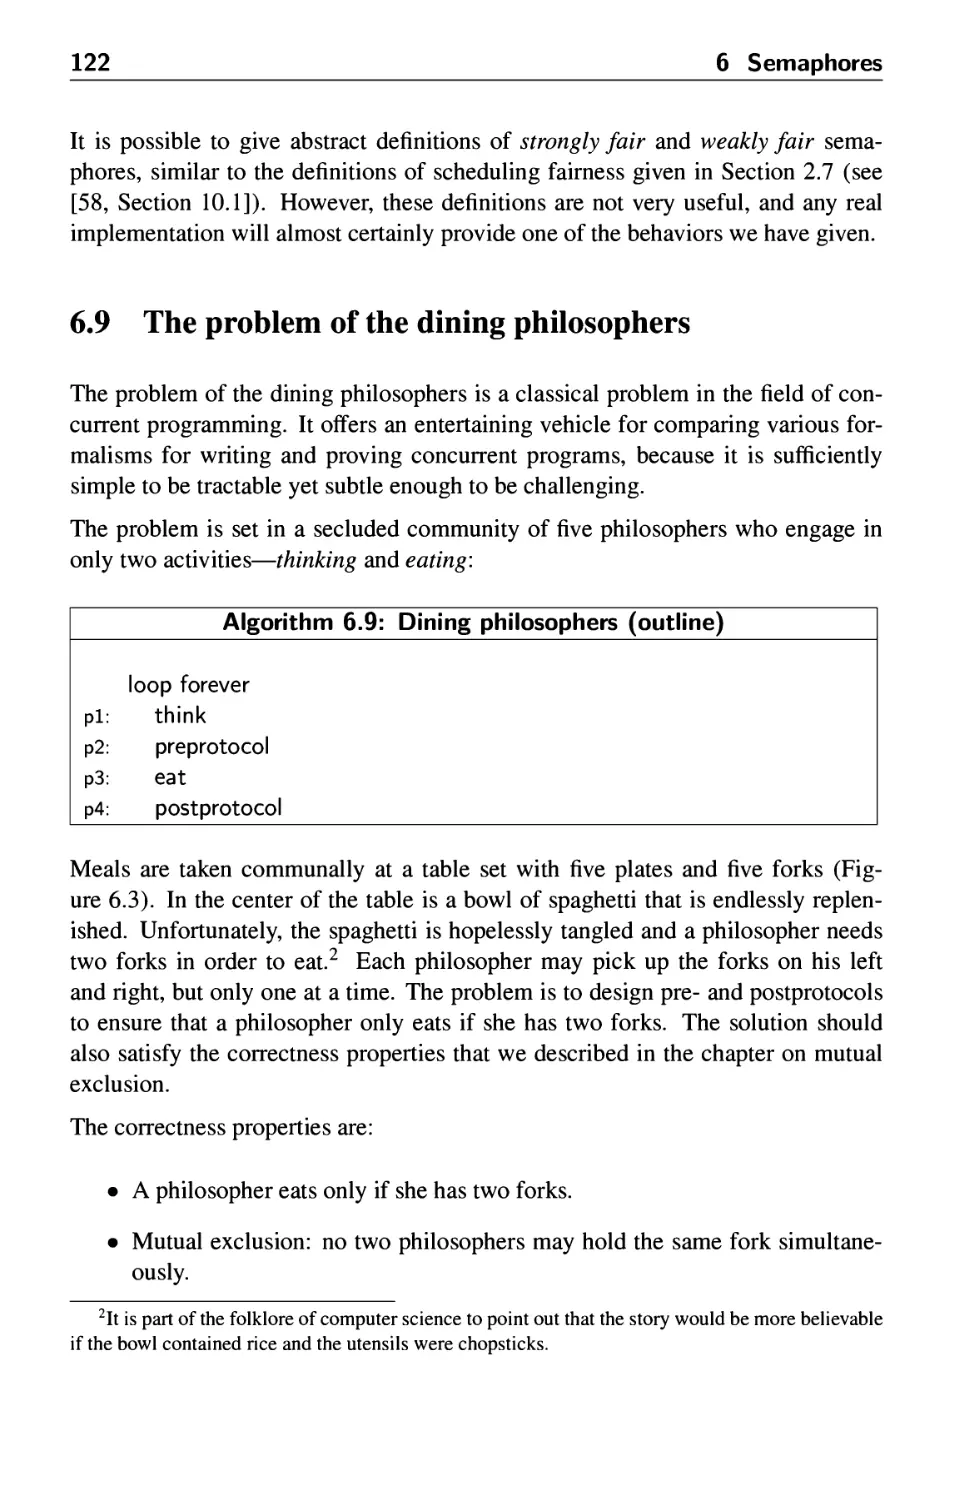 6.9 The problem of the dining philosophers